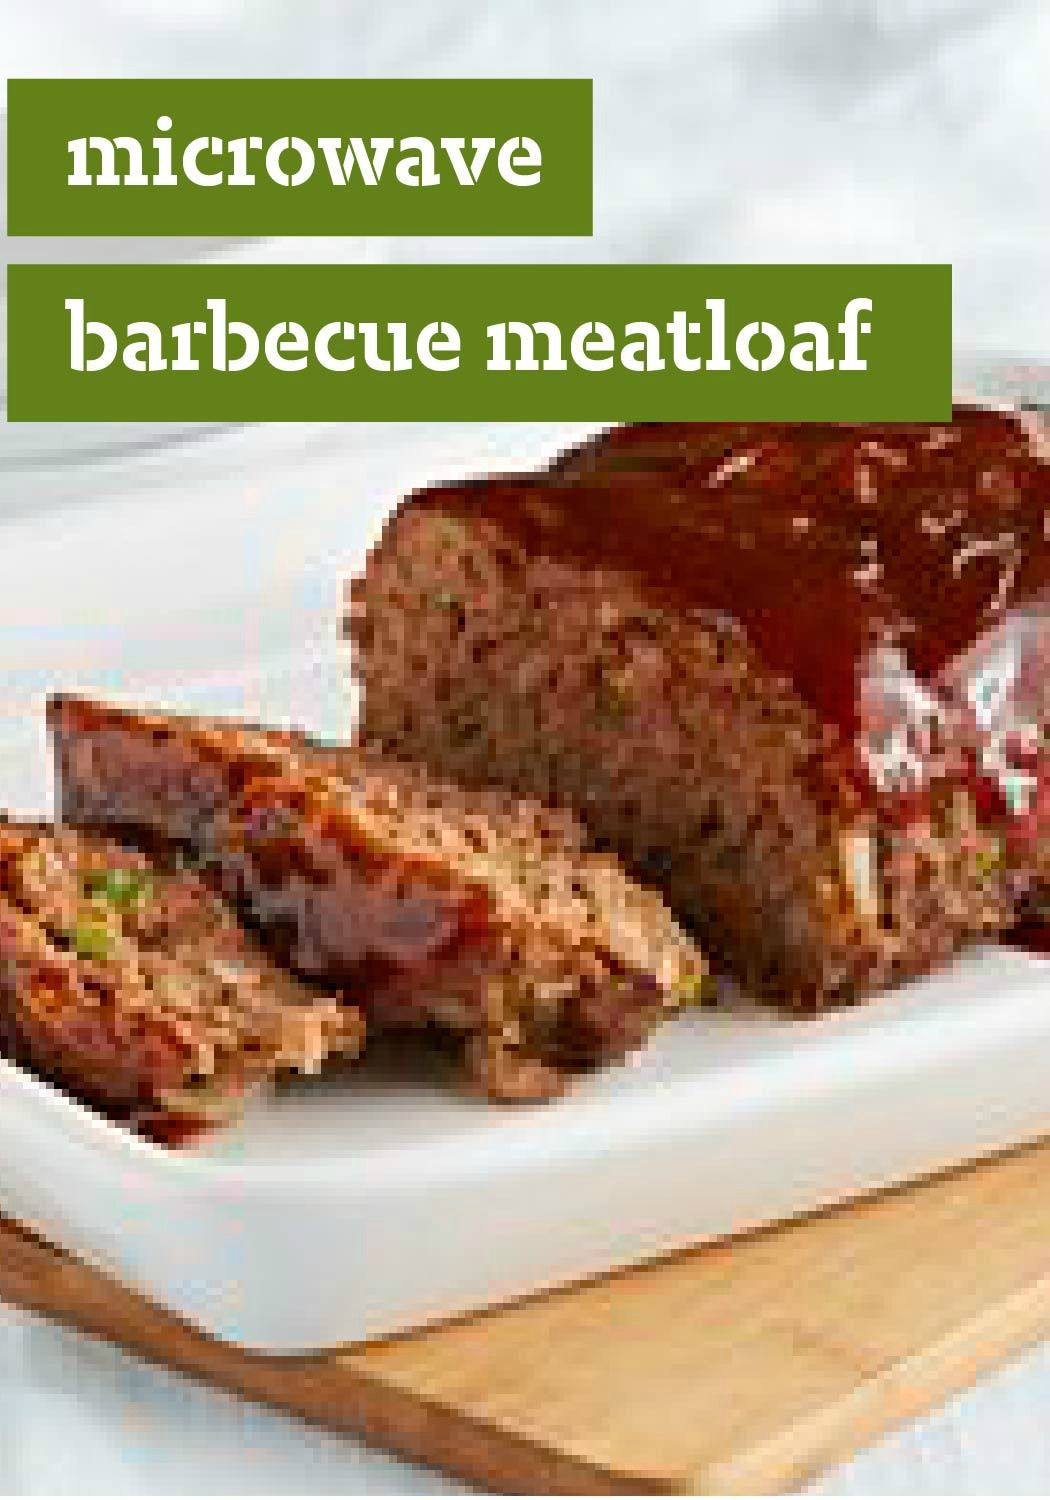 Meatloaf In Microwave
 Microwave Barbecue Meatloaf – A tasty barbecue meatloaf